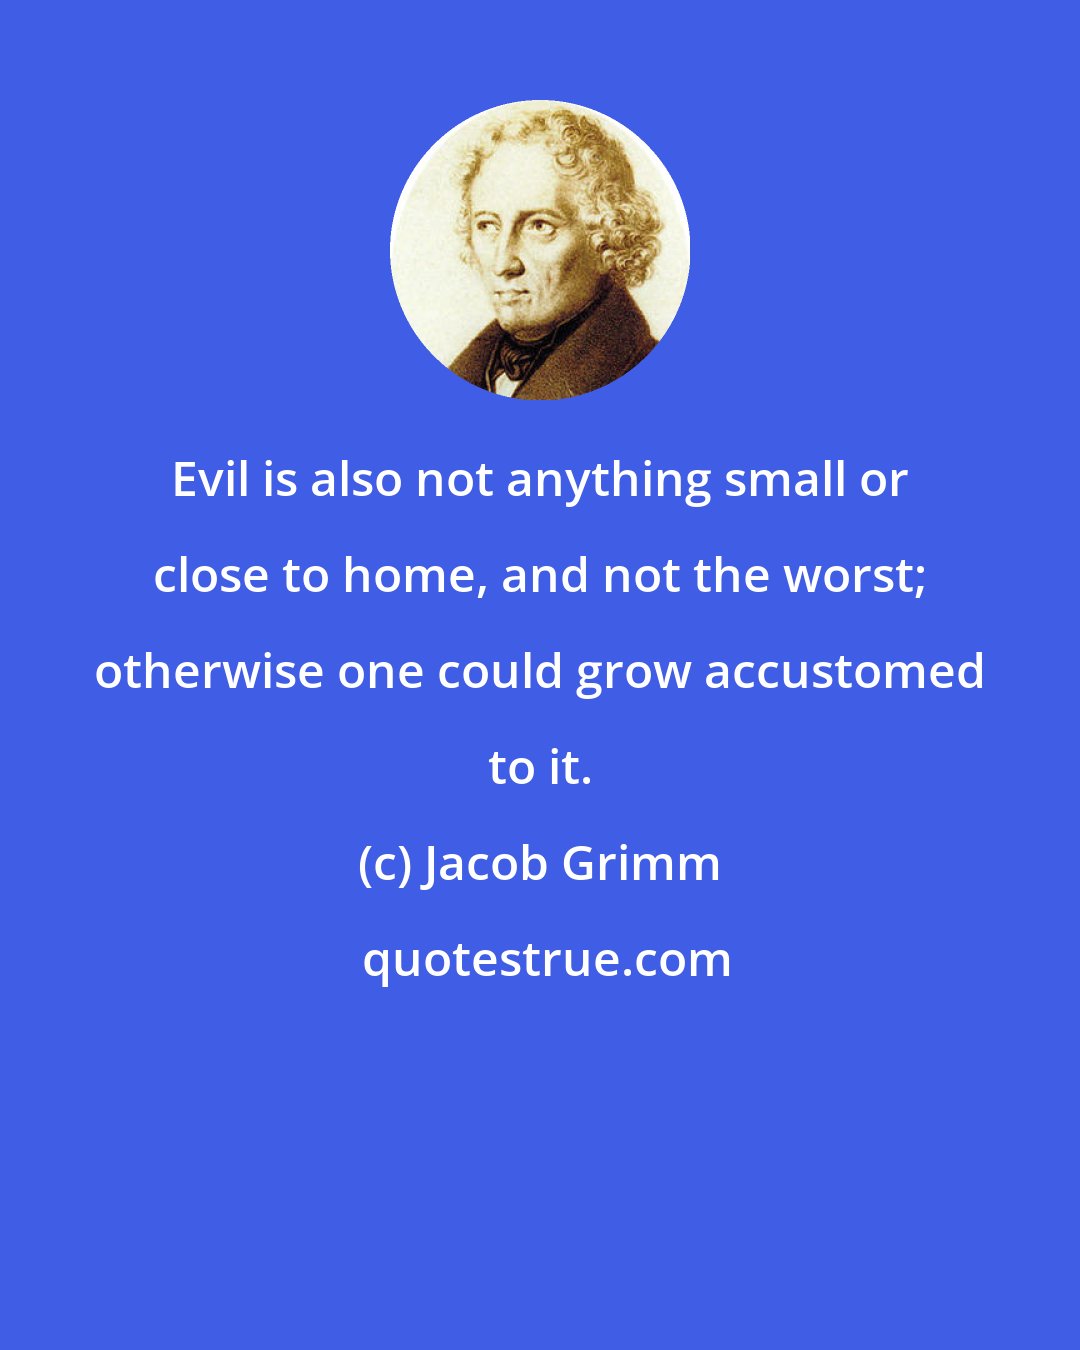 Jacob Grimm: Evil is also not anything small or close to home, and not the worst; otherwise one could grow accustomed to it.